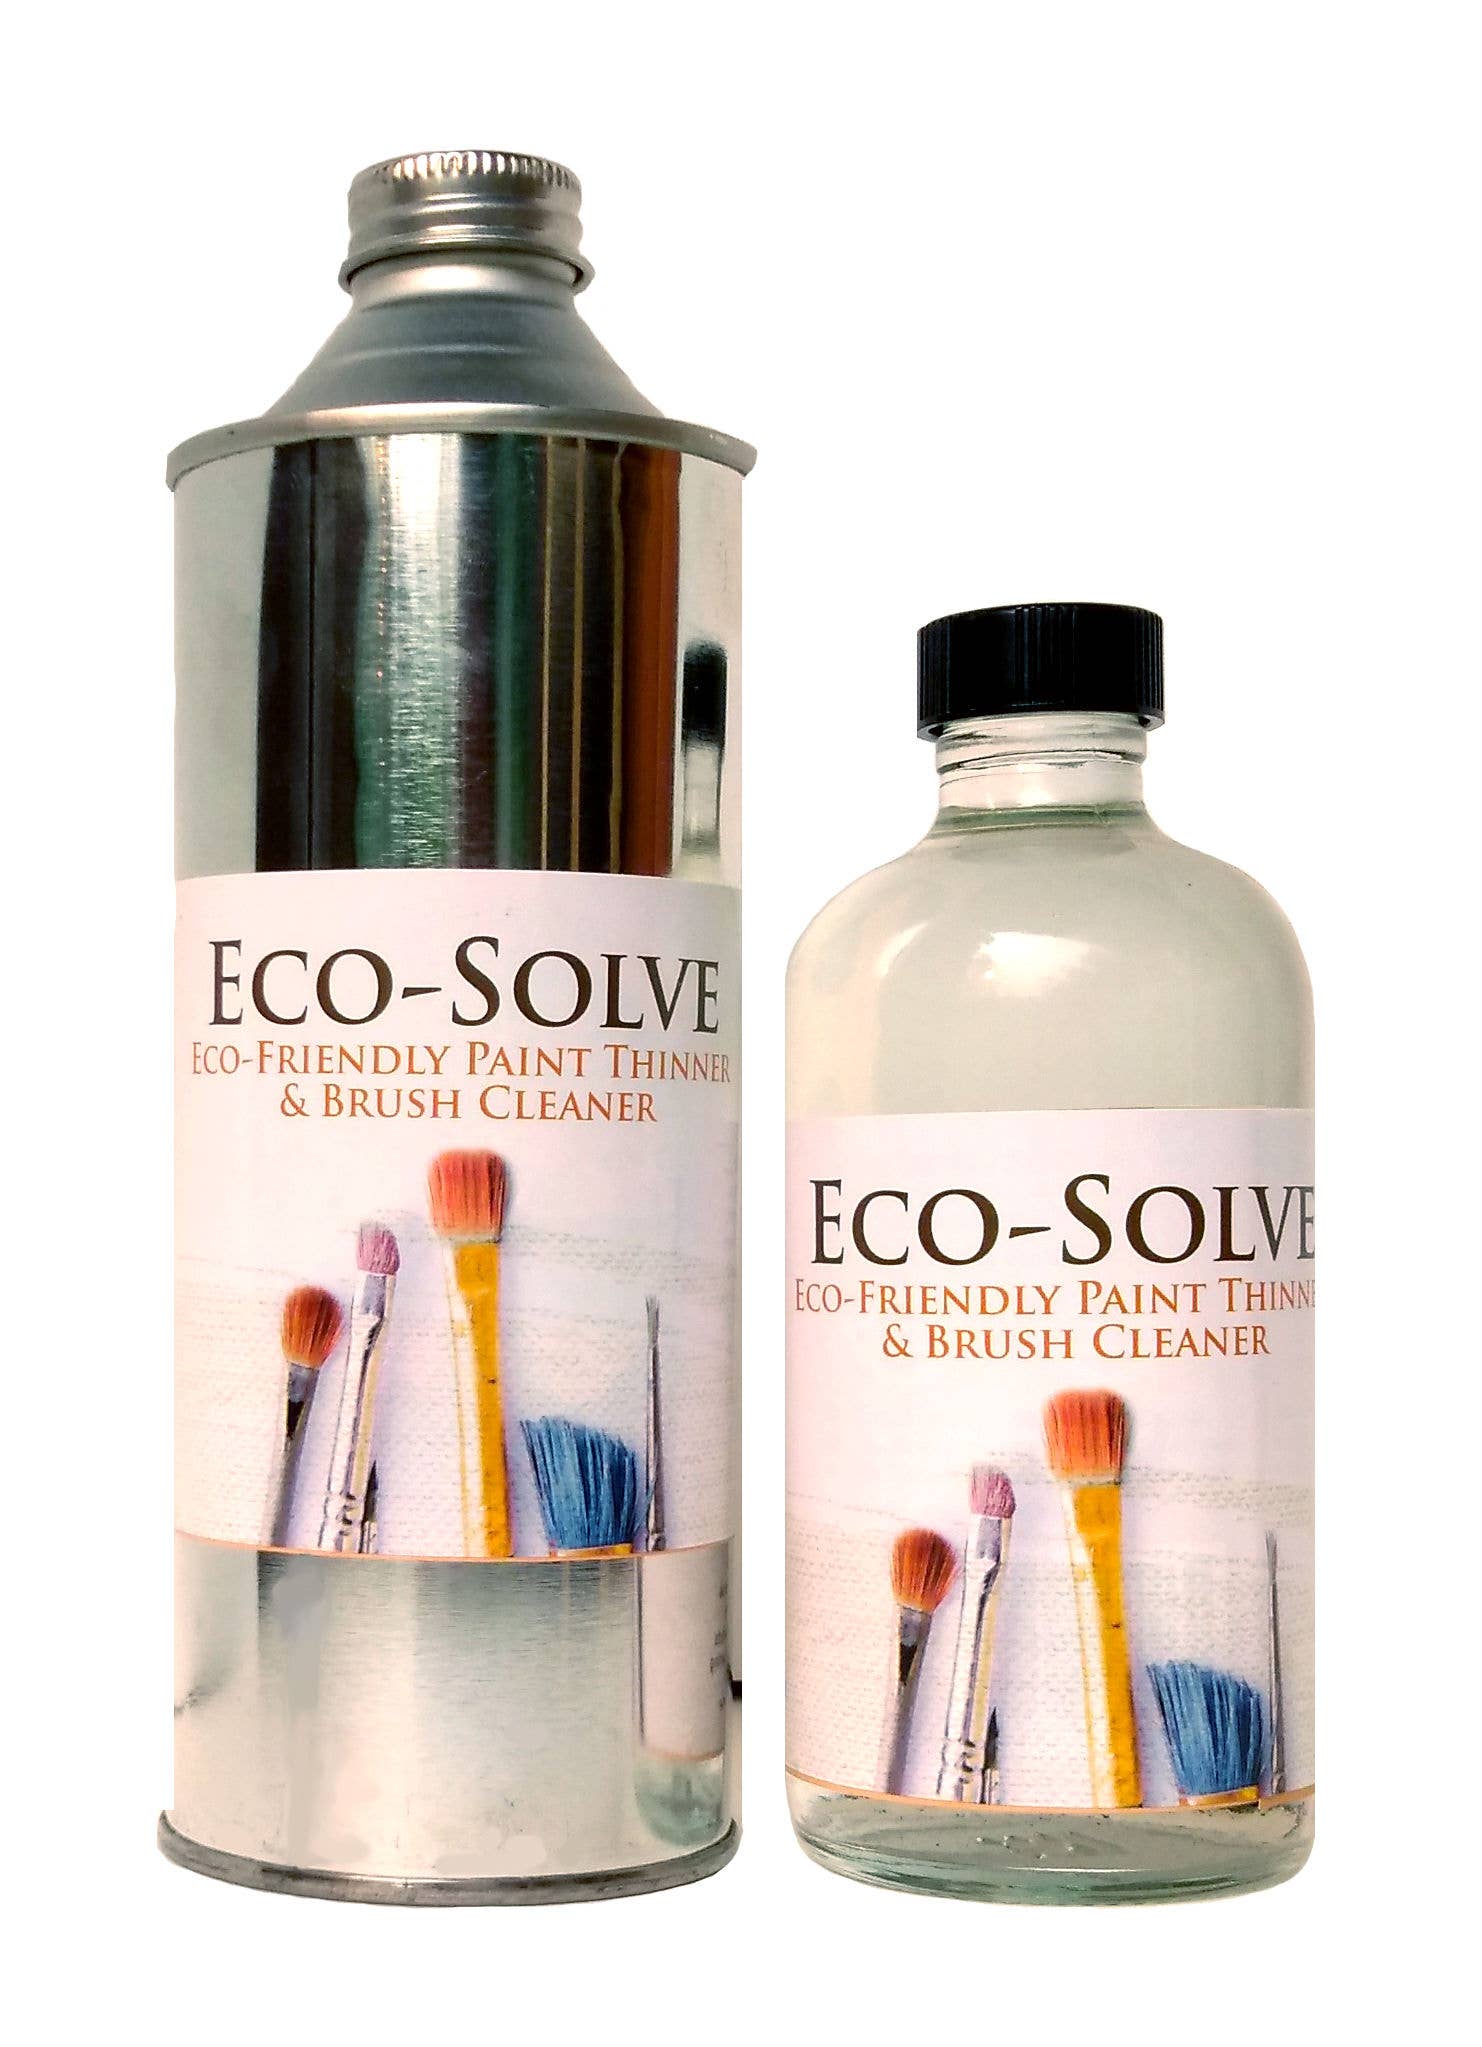 Eco-Solve Paint Thinner